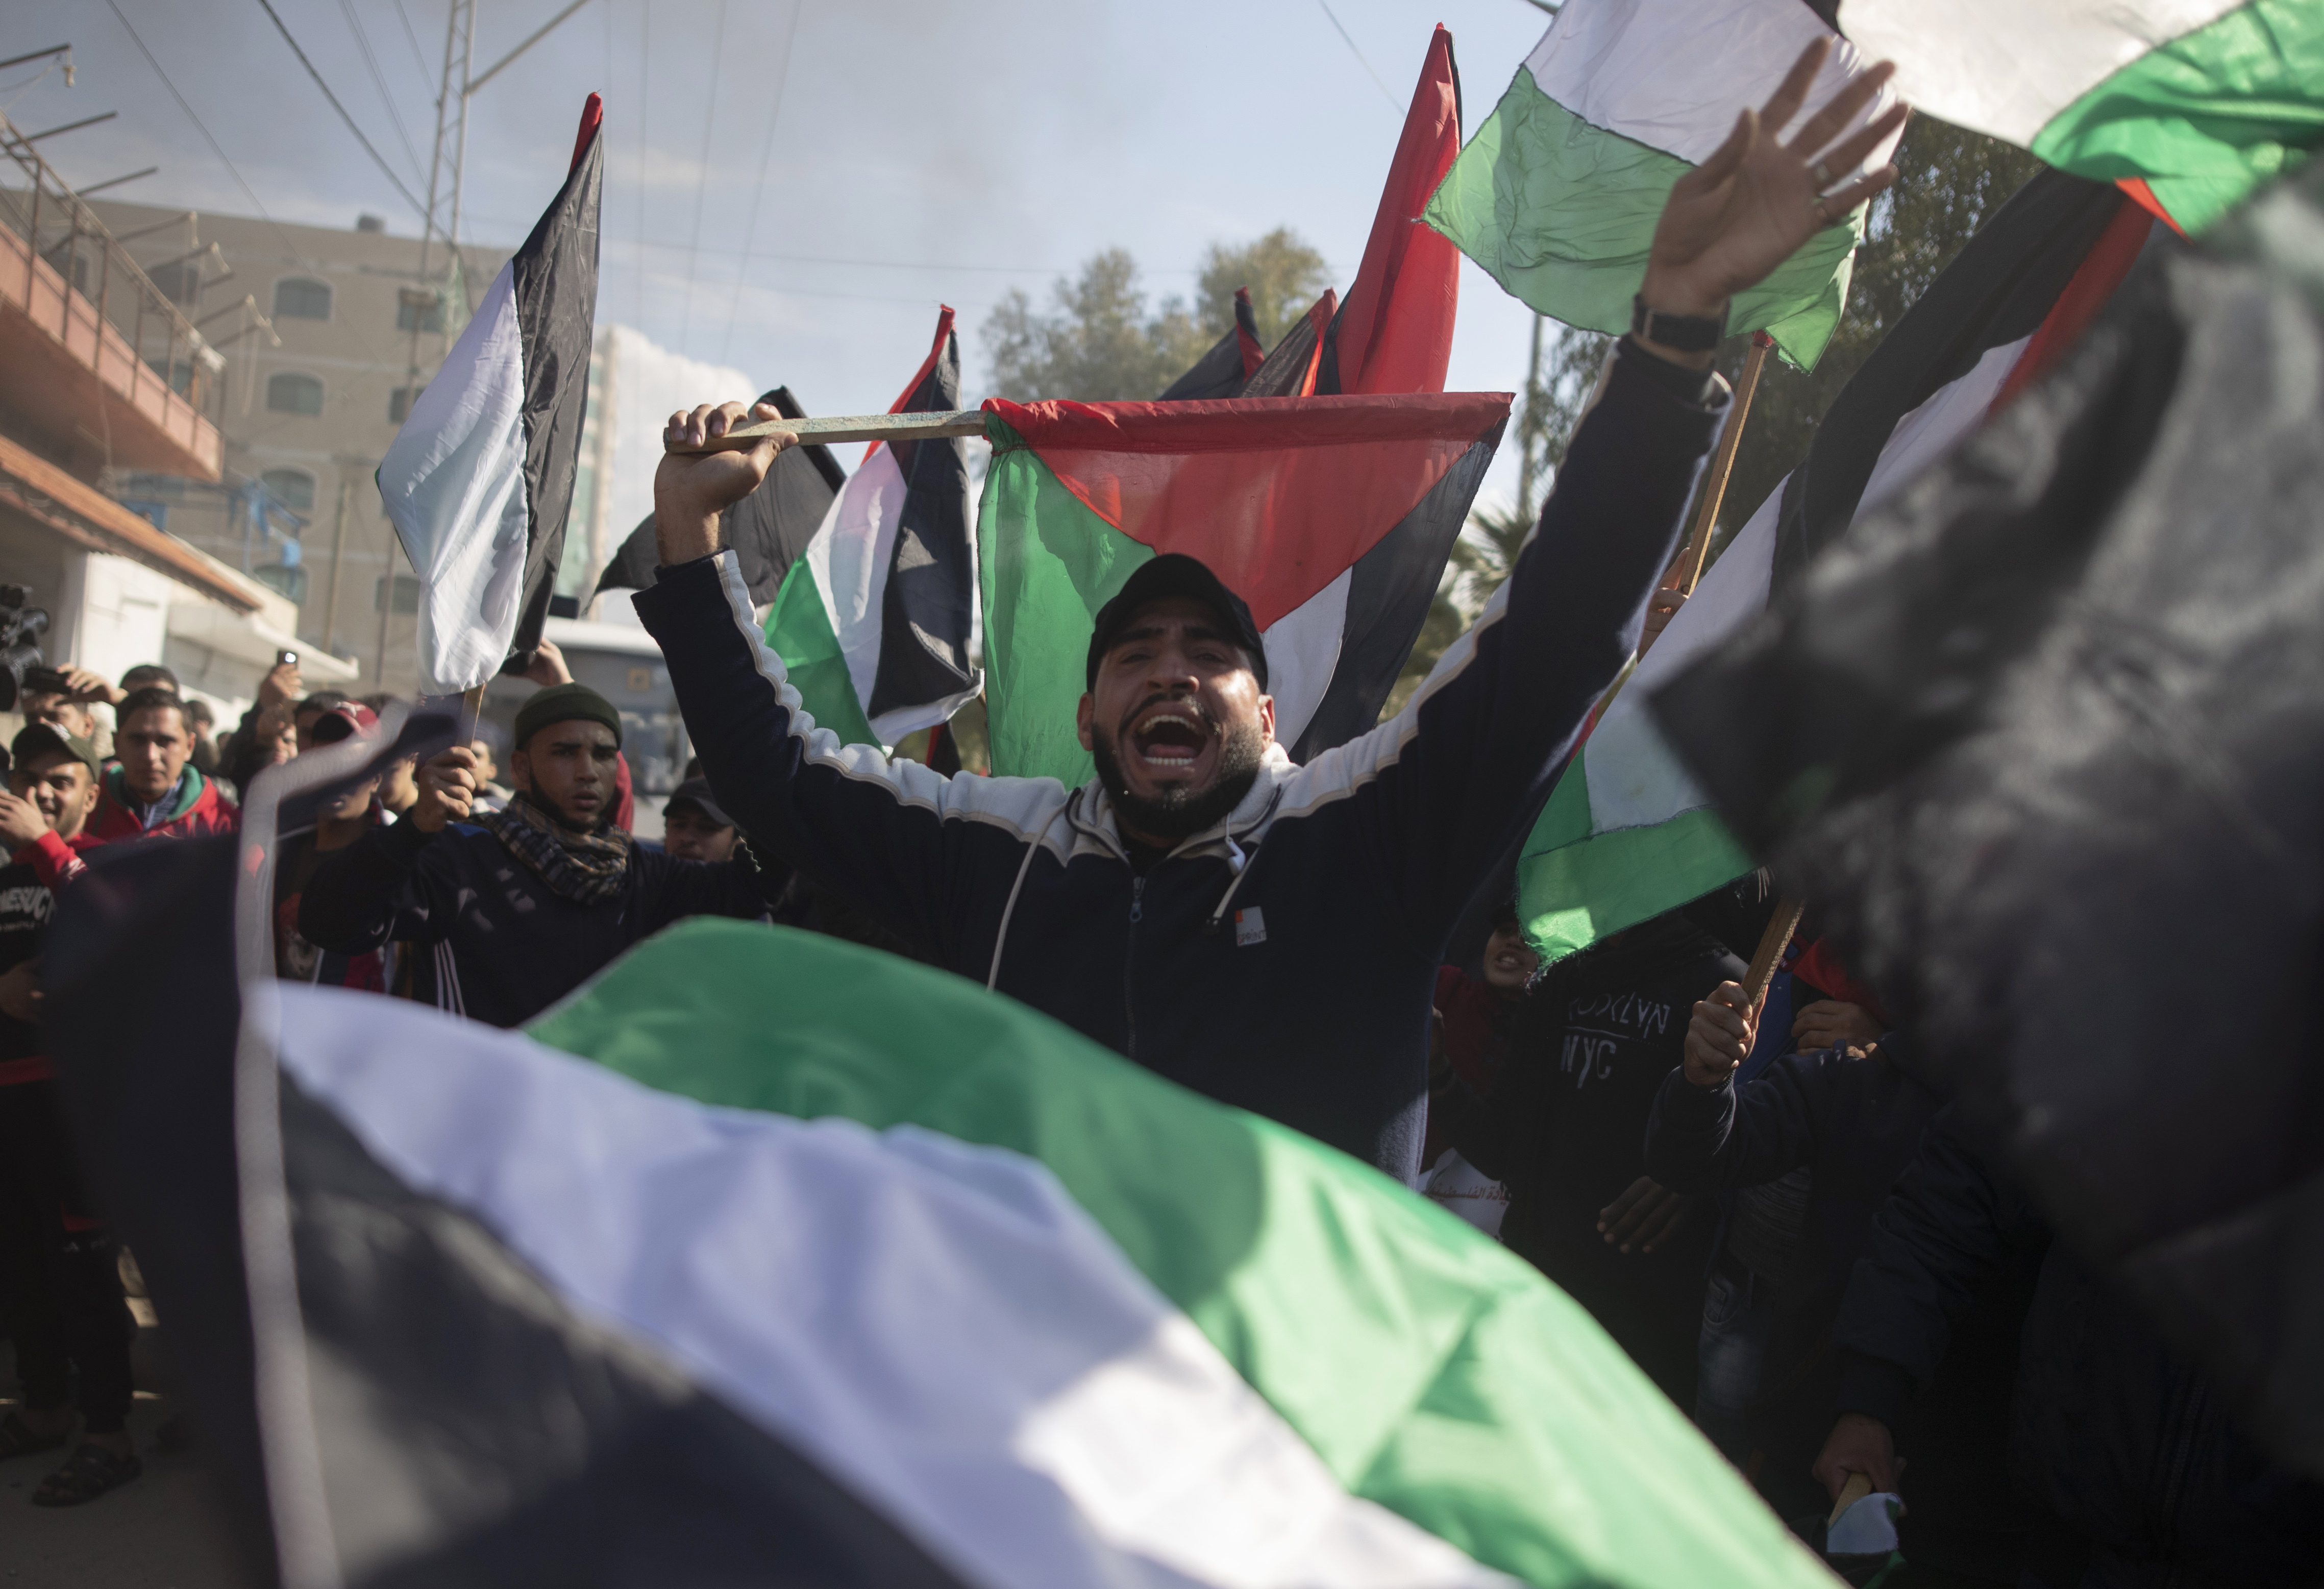 Palestinian protesters wave national flags and chant angry slogans during a protest against the U.S. Mideast peace plan, in Gaza City, Monday, Jan. 28, 2020. U.S. President Donald Trump is set to unveil his administration's much-anticipated Mideast peace plan in the latest U.S.  venture to resolve the Israeli-Palestinian conflict. (AP Photo/Khalil Hamra)